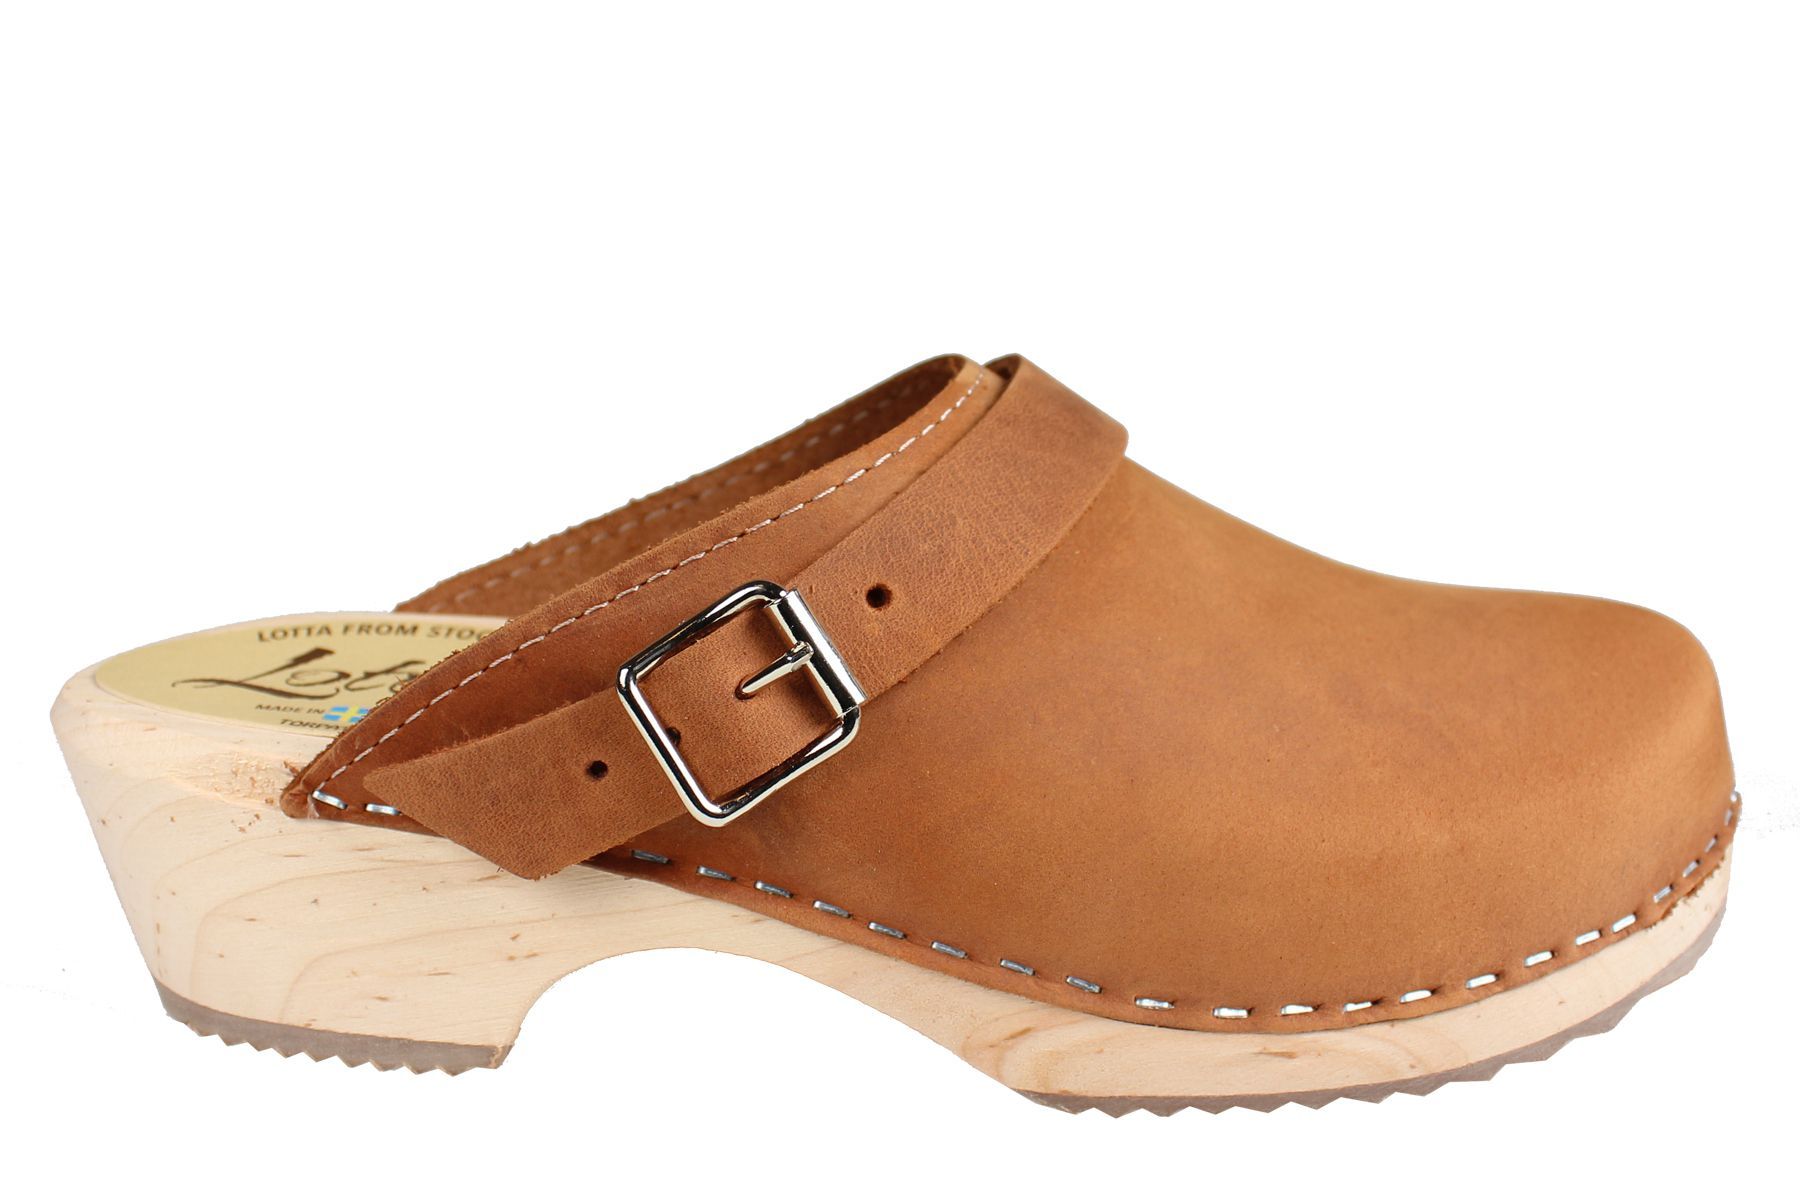 Classic brown oiled nubuck with strap Seconds